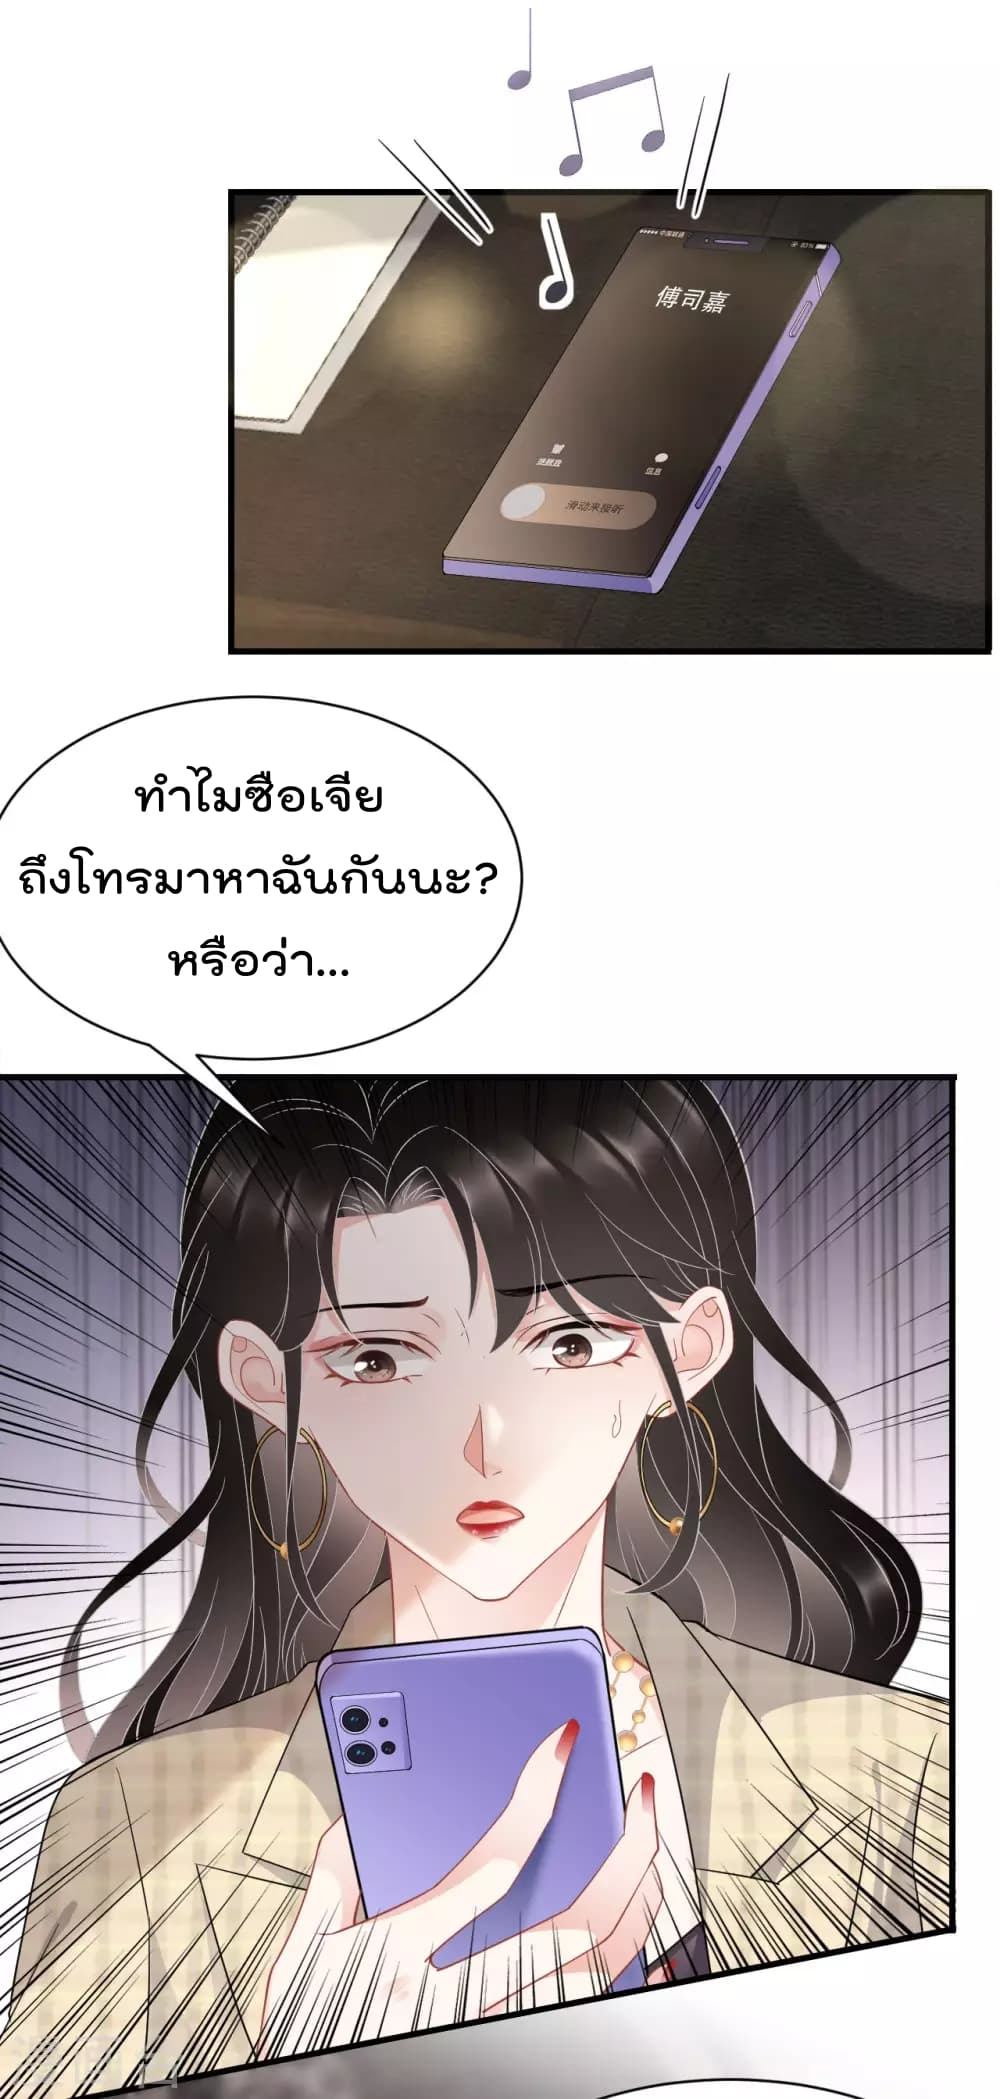 What Can the Eldest Lady Have คุณหนูใหญ่ ทำไมคุณร้ายอย่างนี้ 36-36